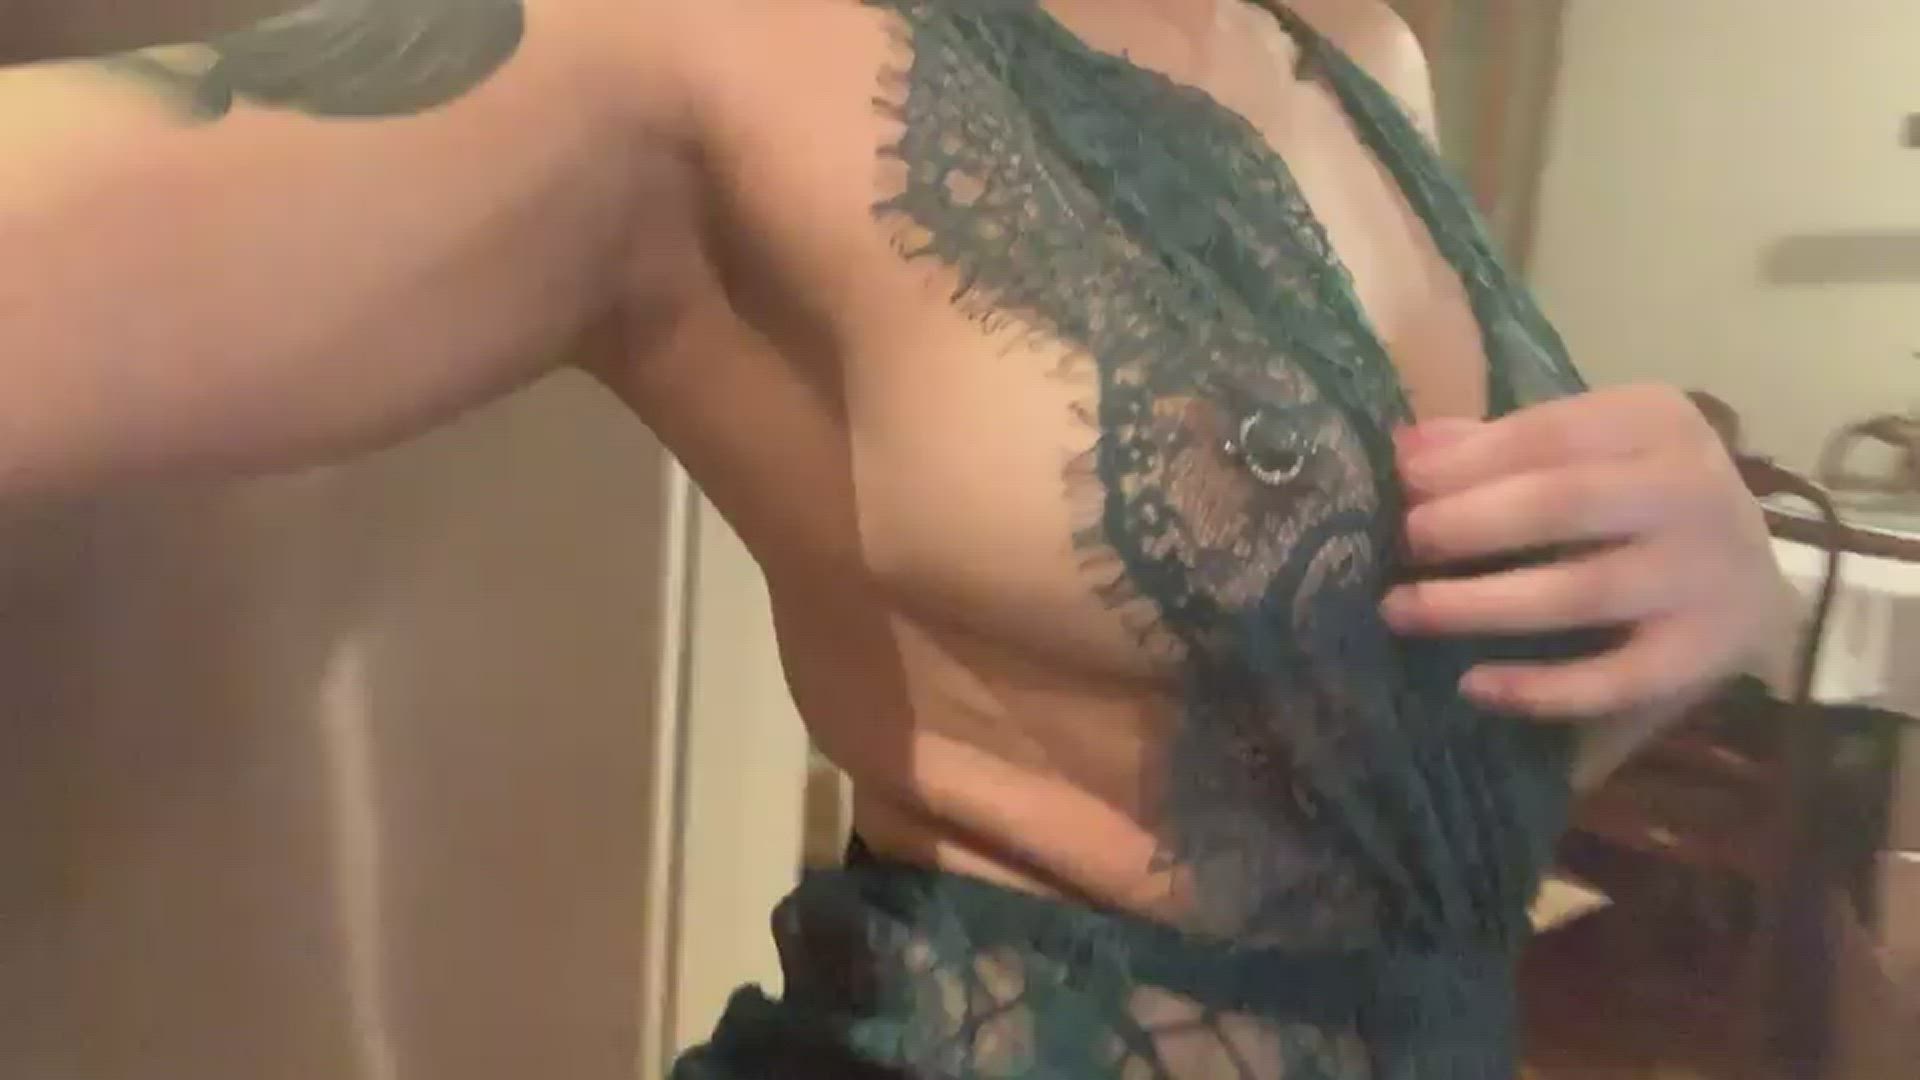 Sideboob porn video with onlyfans model Briana✨ <strong>@brianamonique</strong>